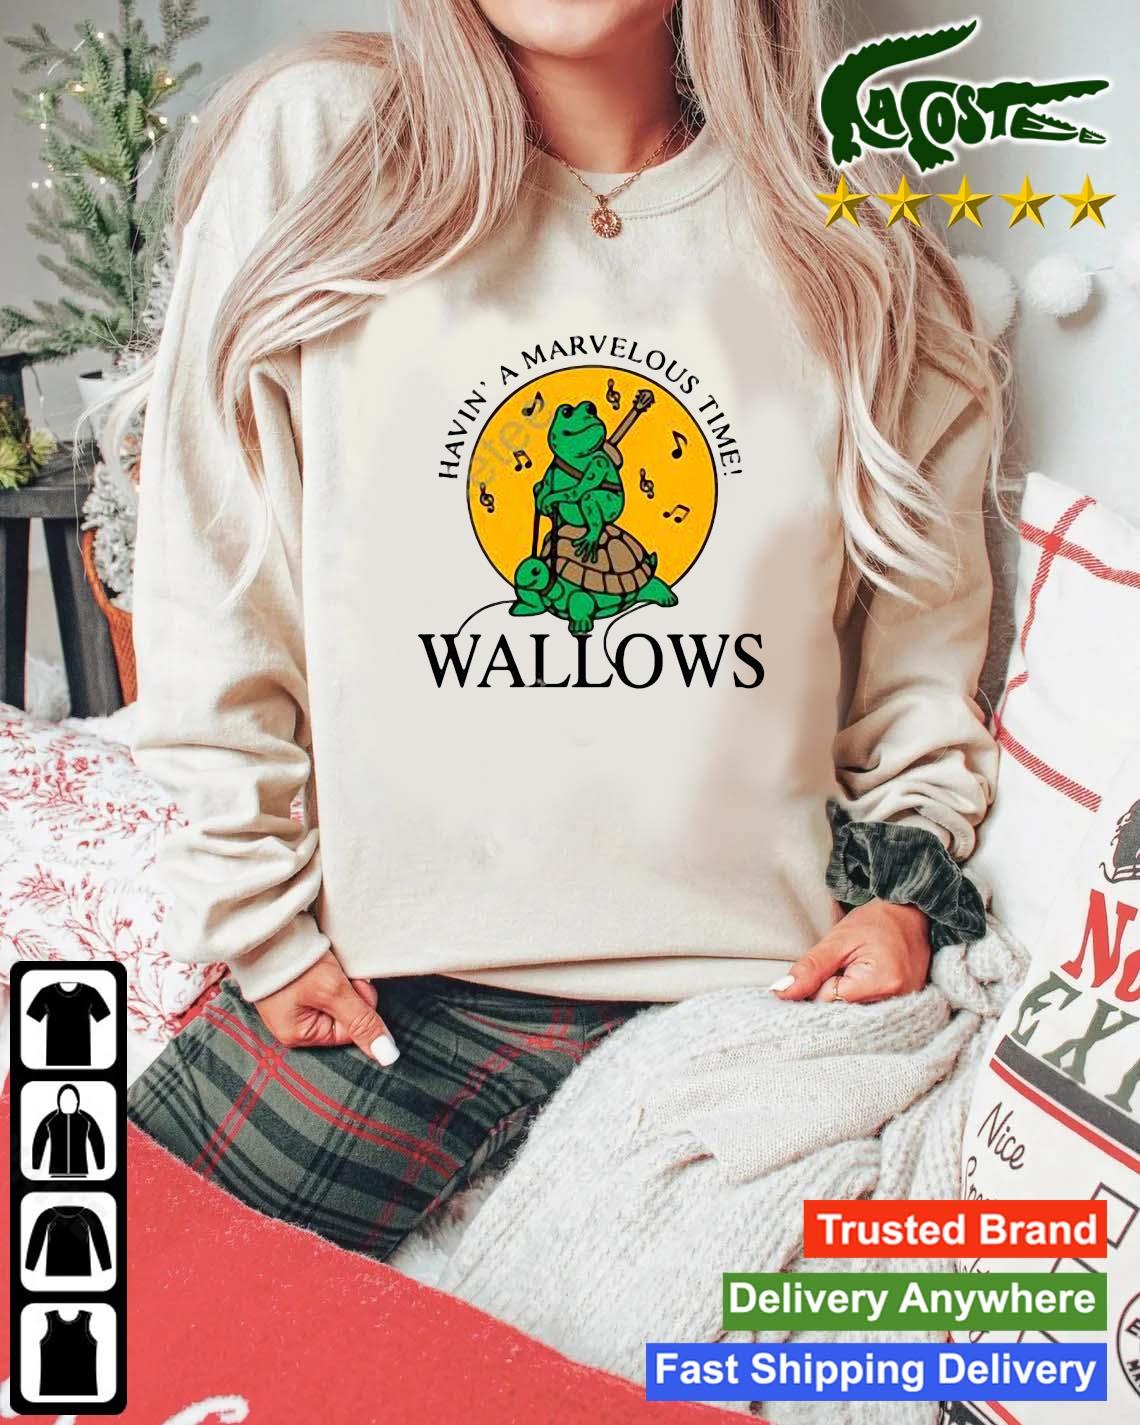 Frog And Turtle Havin' A Marvelous Time Wallows Sweats Mockup Sweater